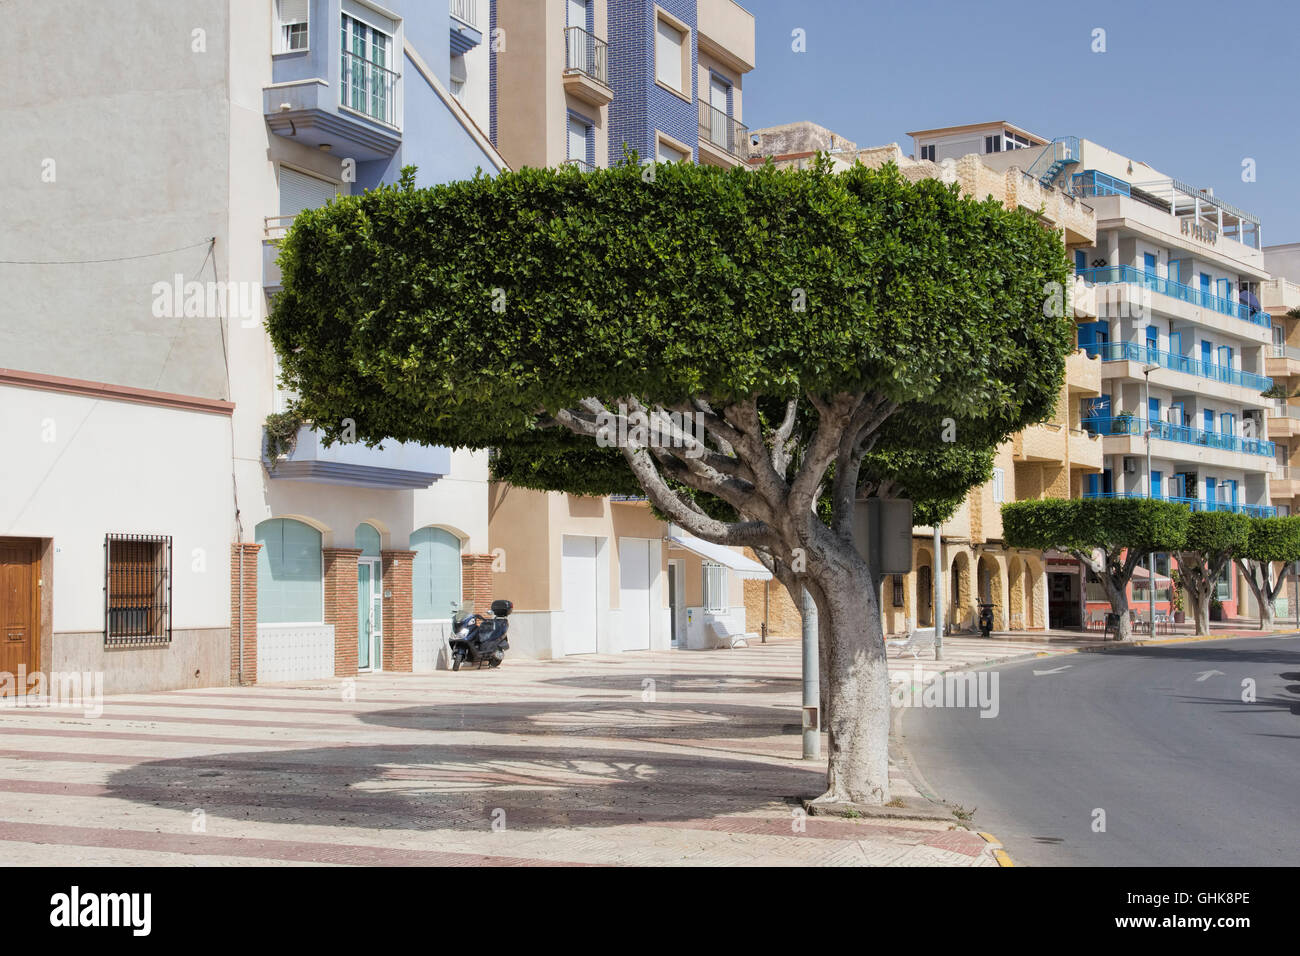 Topiary trees in the street Roquetas de Mar, Costa Almeria, Spain. Andalusia. A Resort enjoyed by the Spanish. Stock Photo